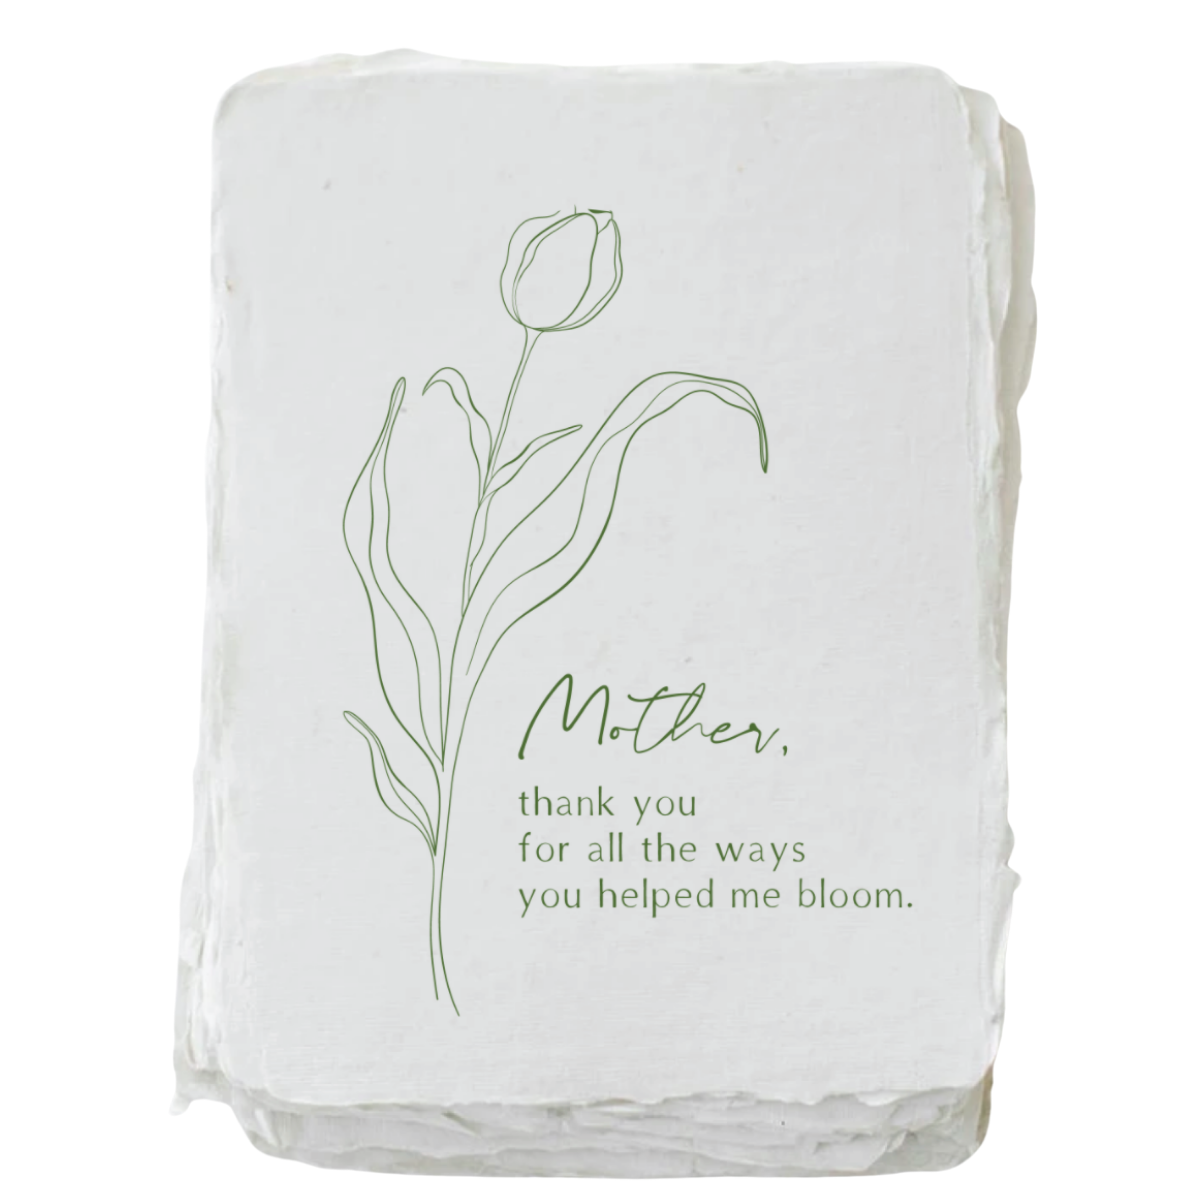 "Mother, you helped me bloom" Flower Greeting Card